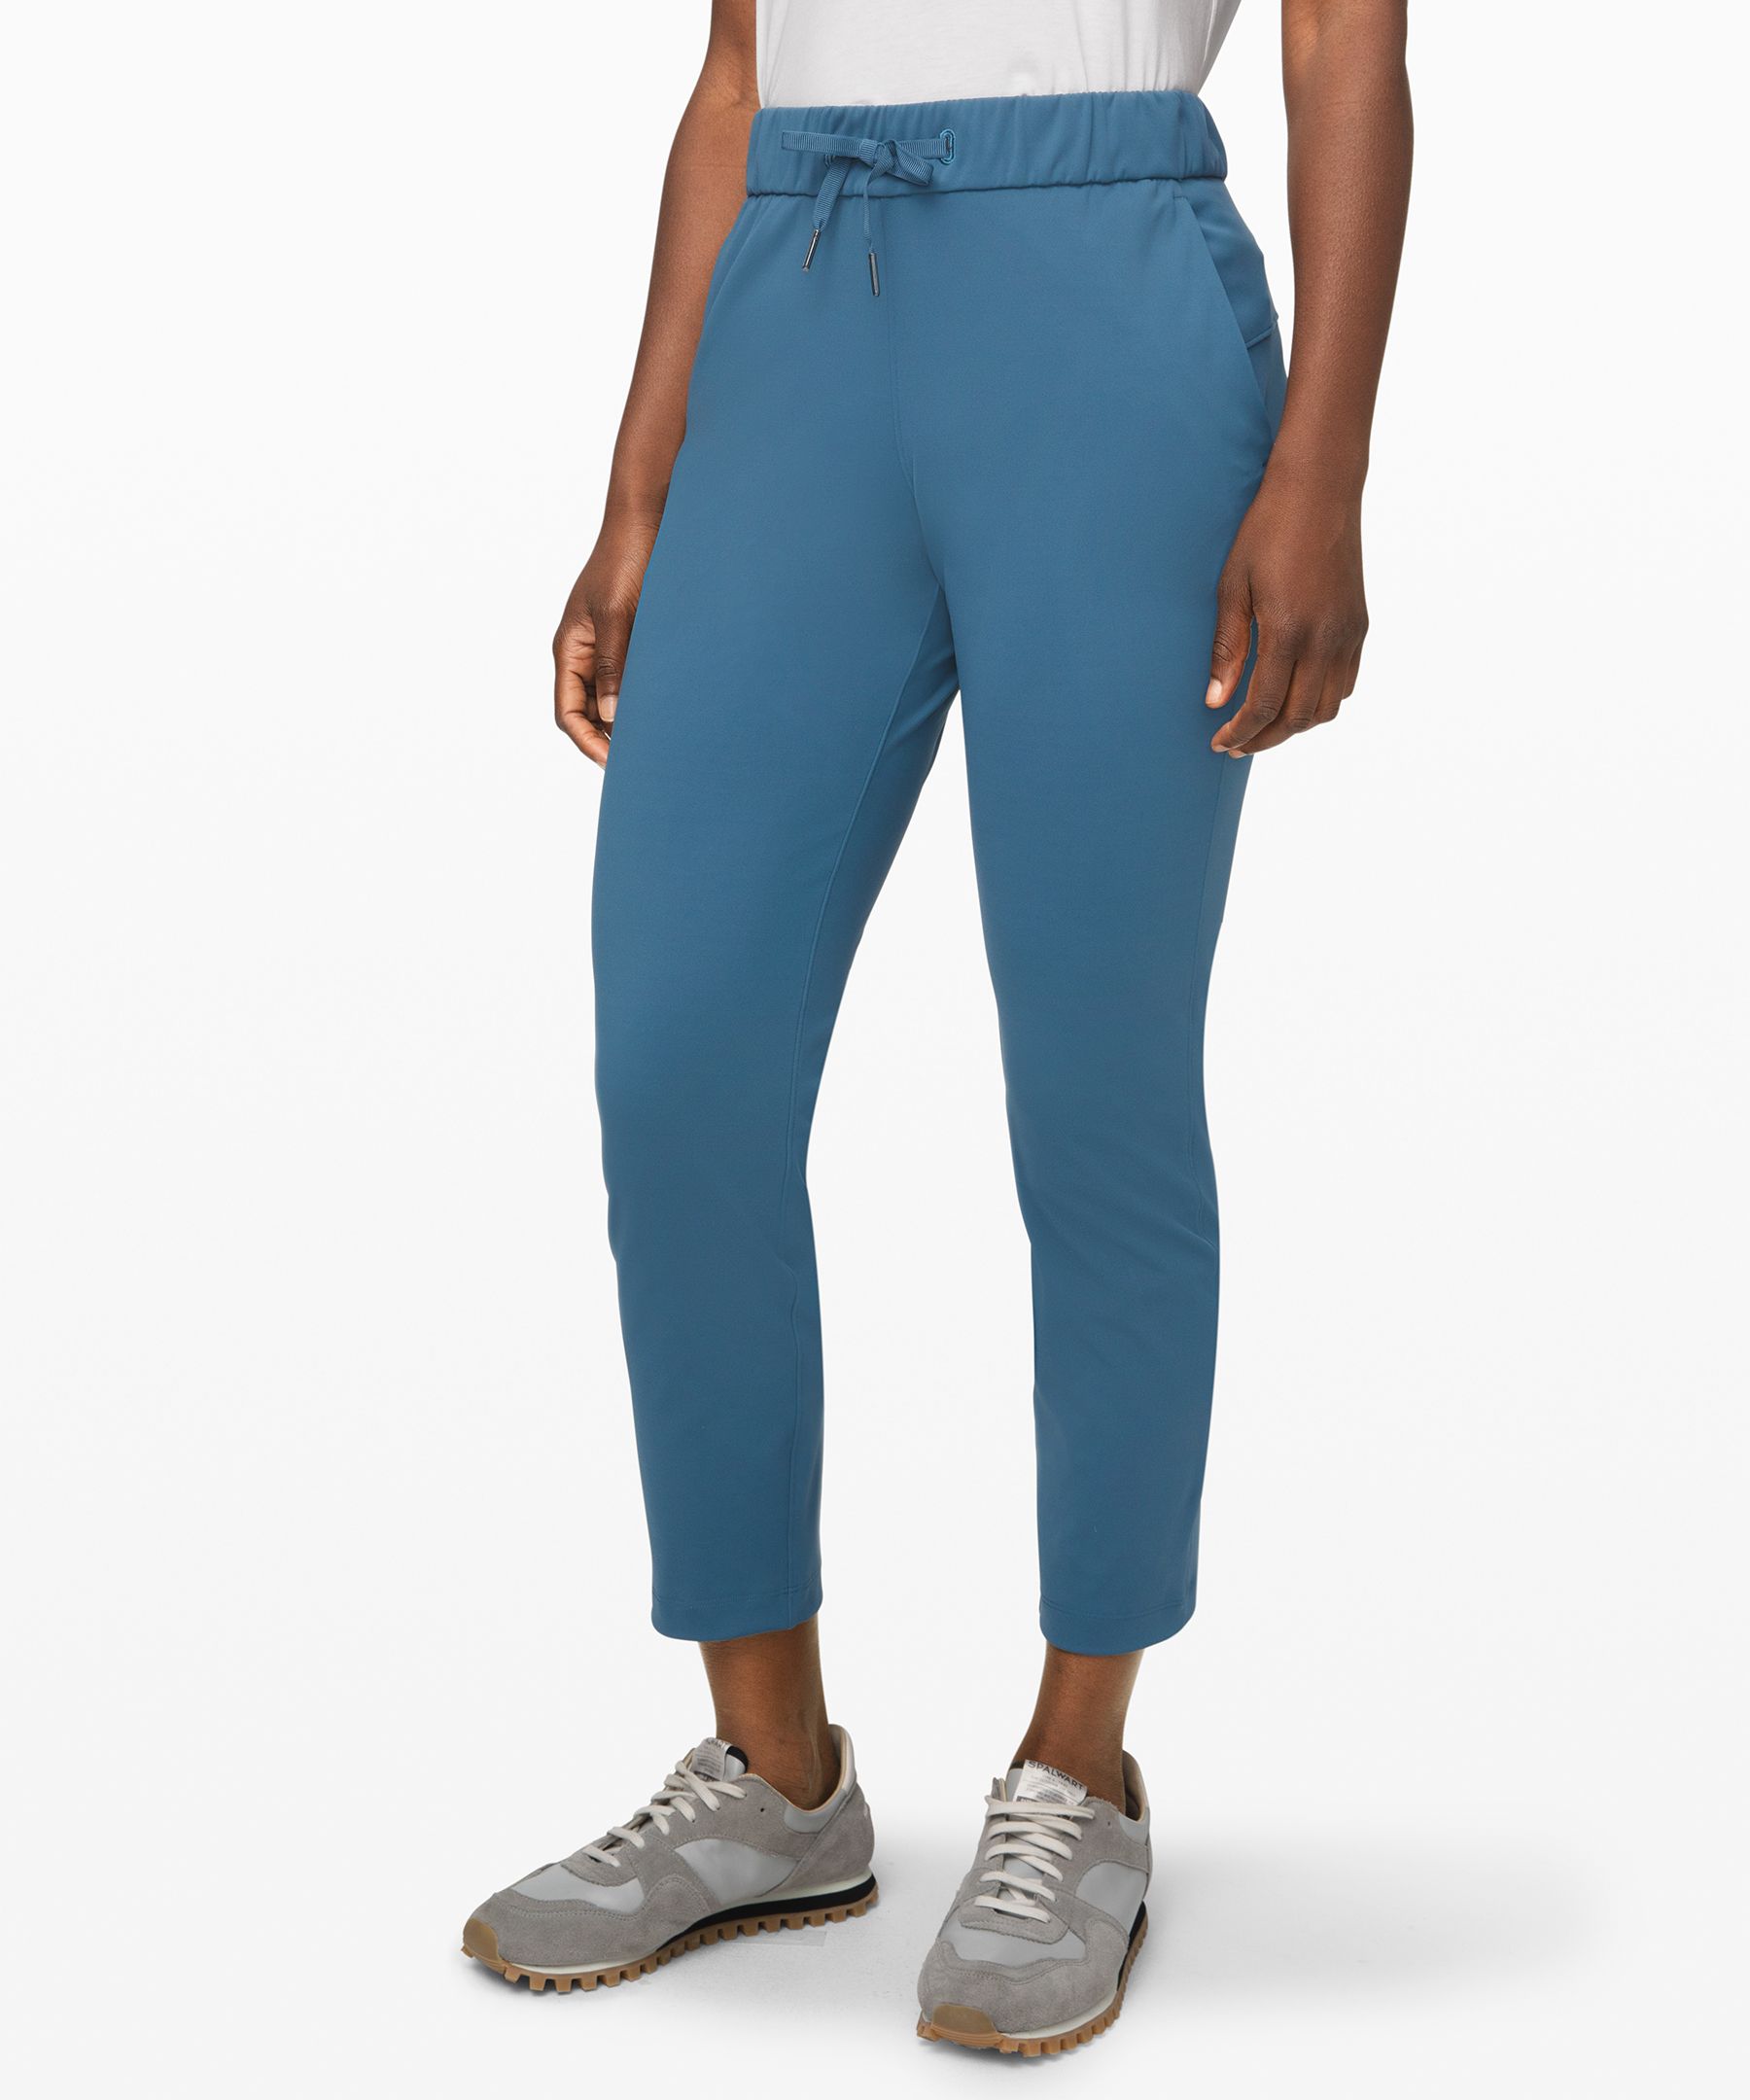 Lululemon On The Fly 7/8 Pant 28" In Petrol Blue